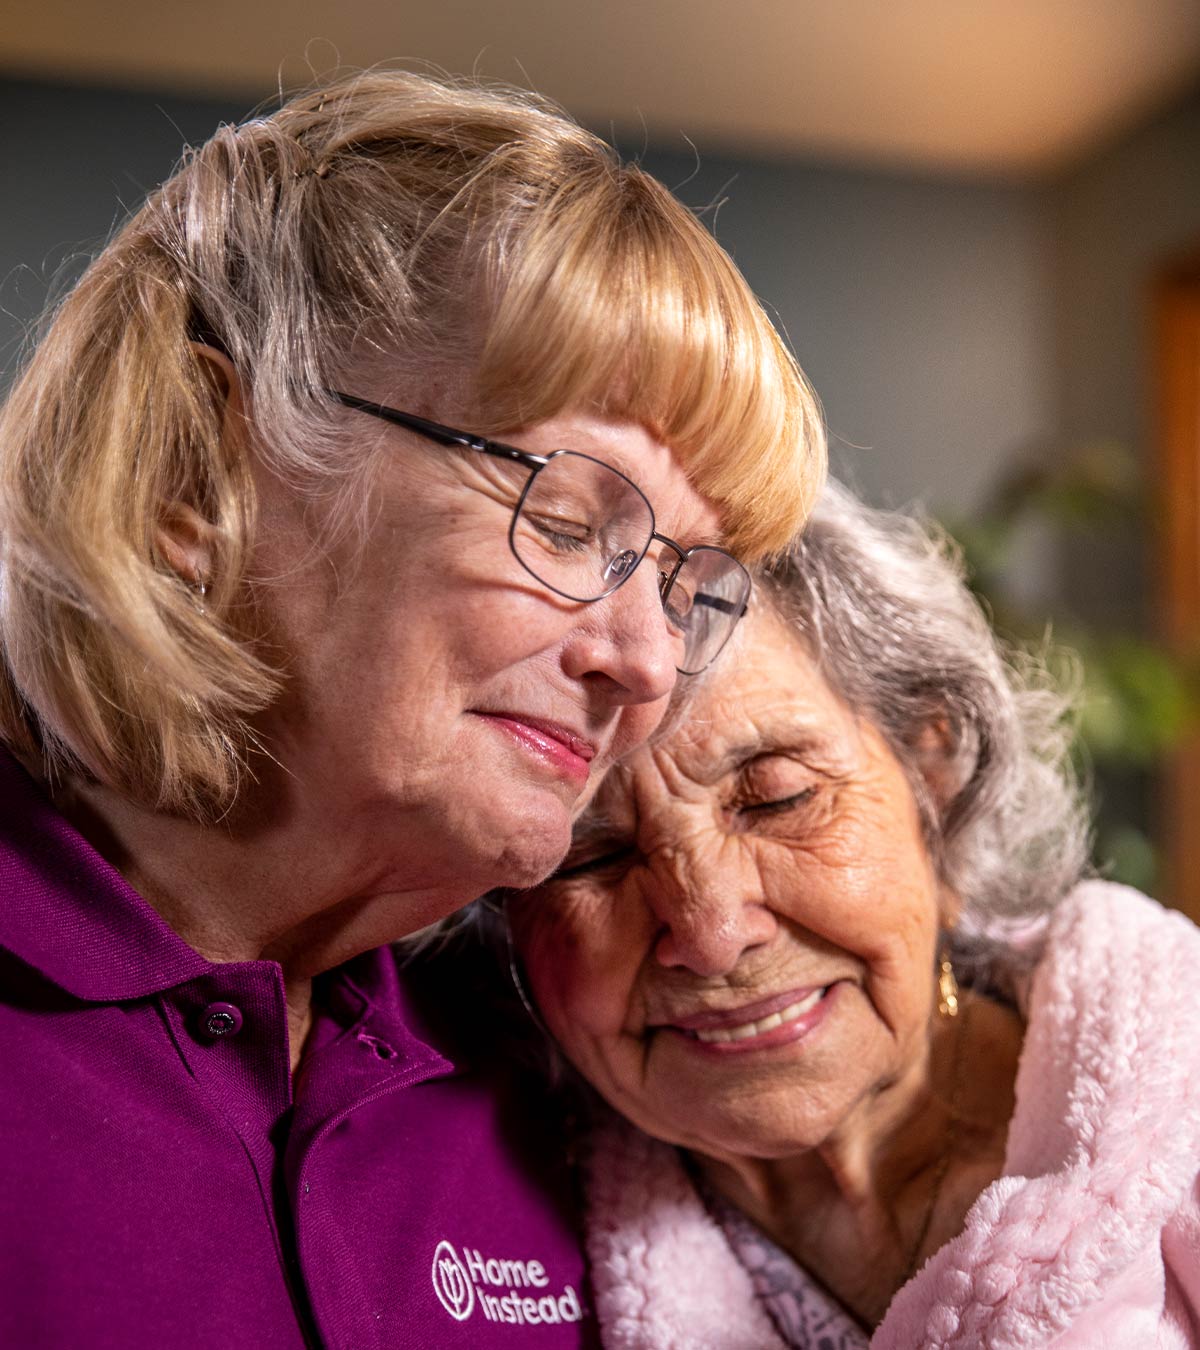 CAREGiver providing in-home senior care services. Home Instead of West Vancouver, BC provides Elder Care to aging adults. 